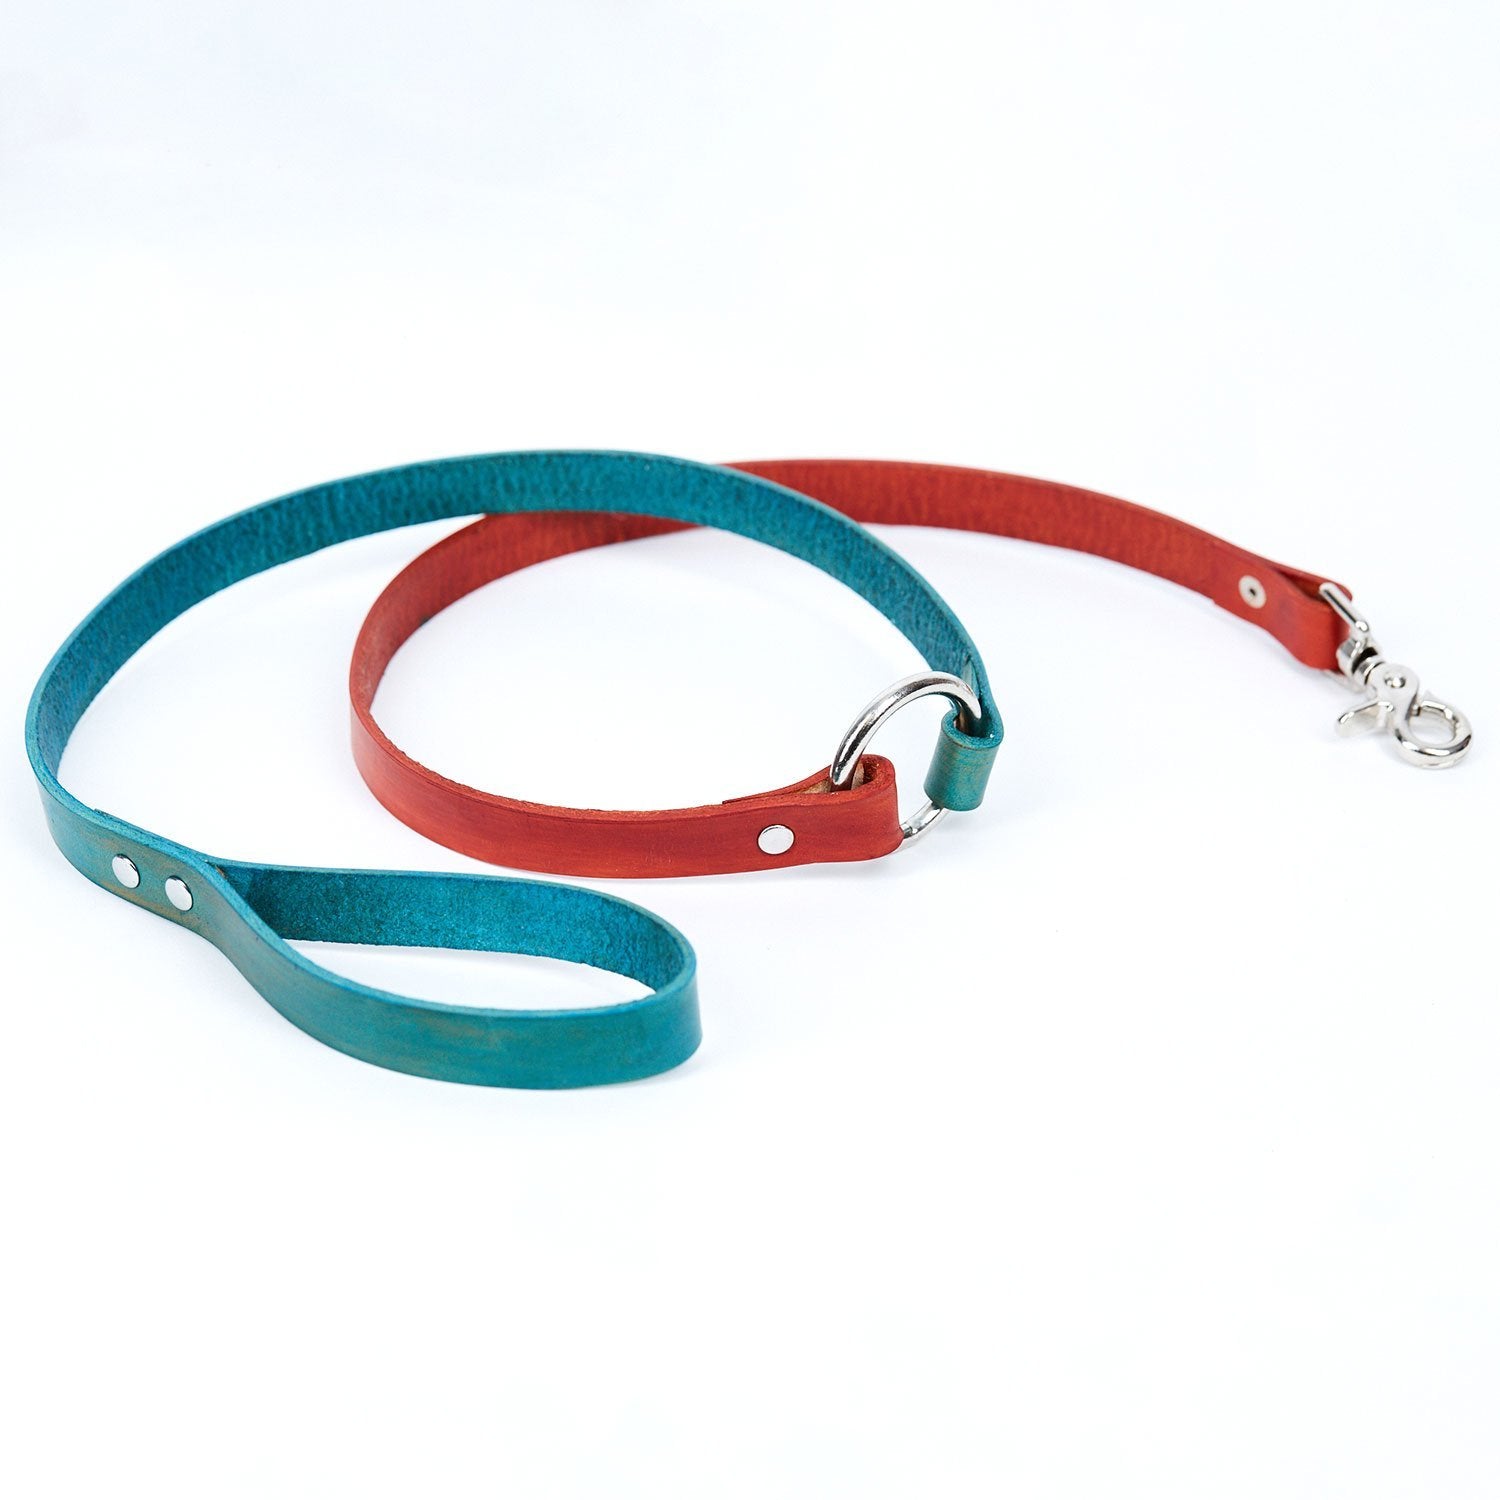 Large Leather Dog Leash - Available in More Colors